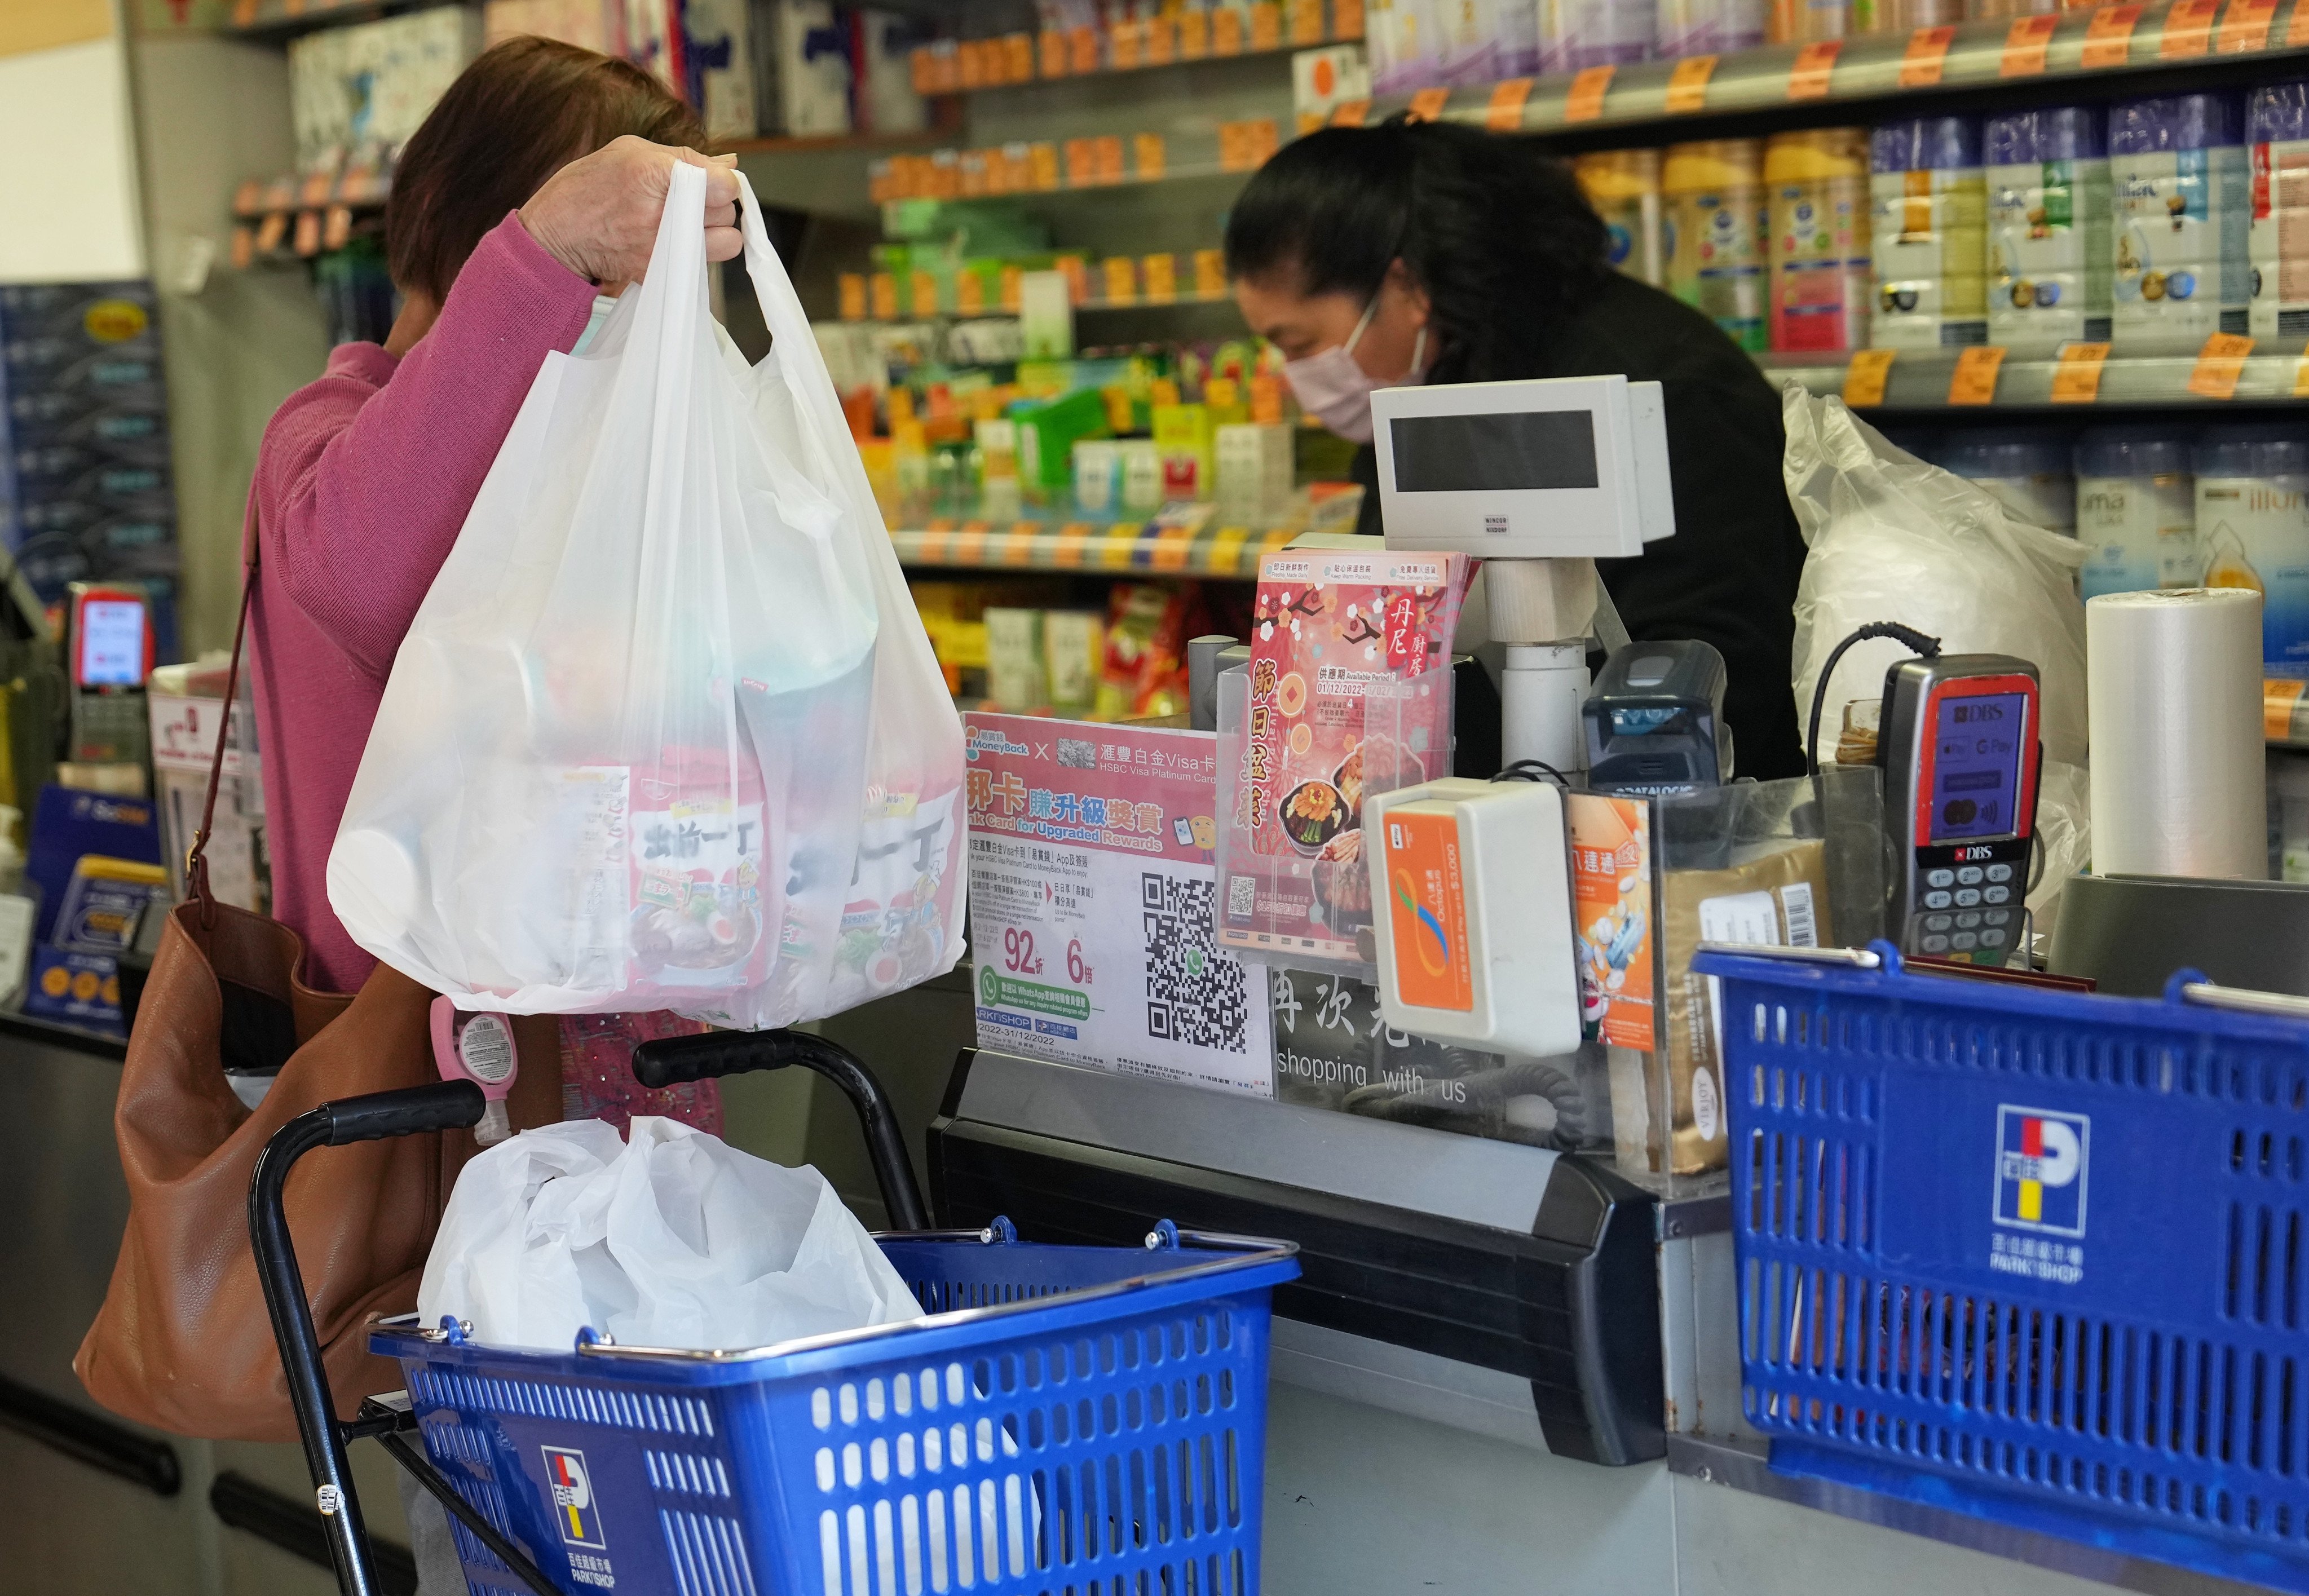 The charge for plastic bags at checkout will double. Photo: Elson Li